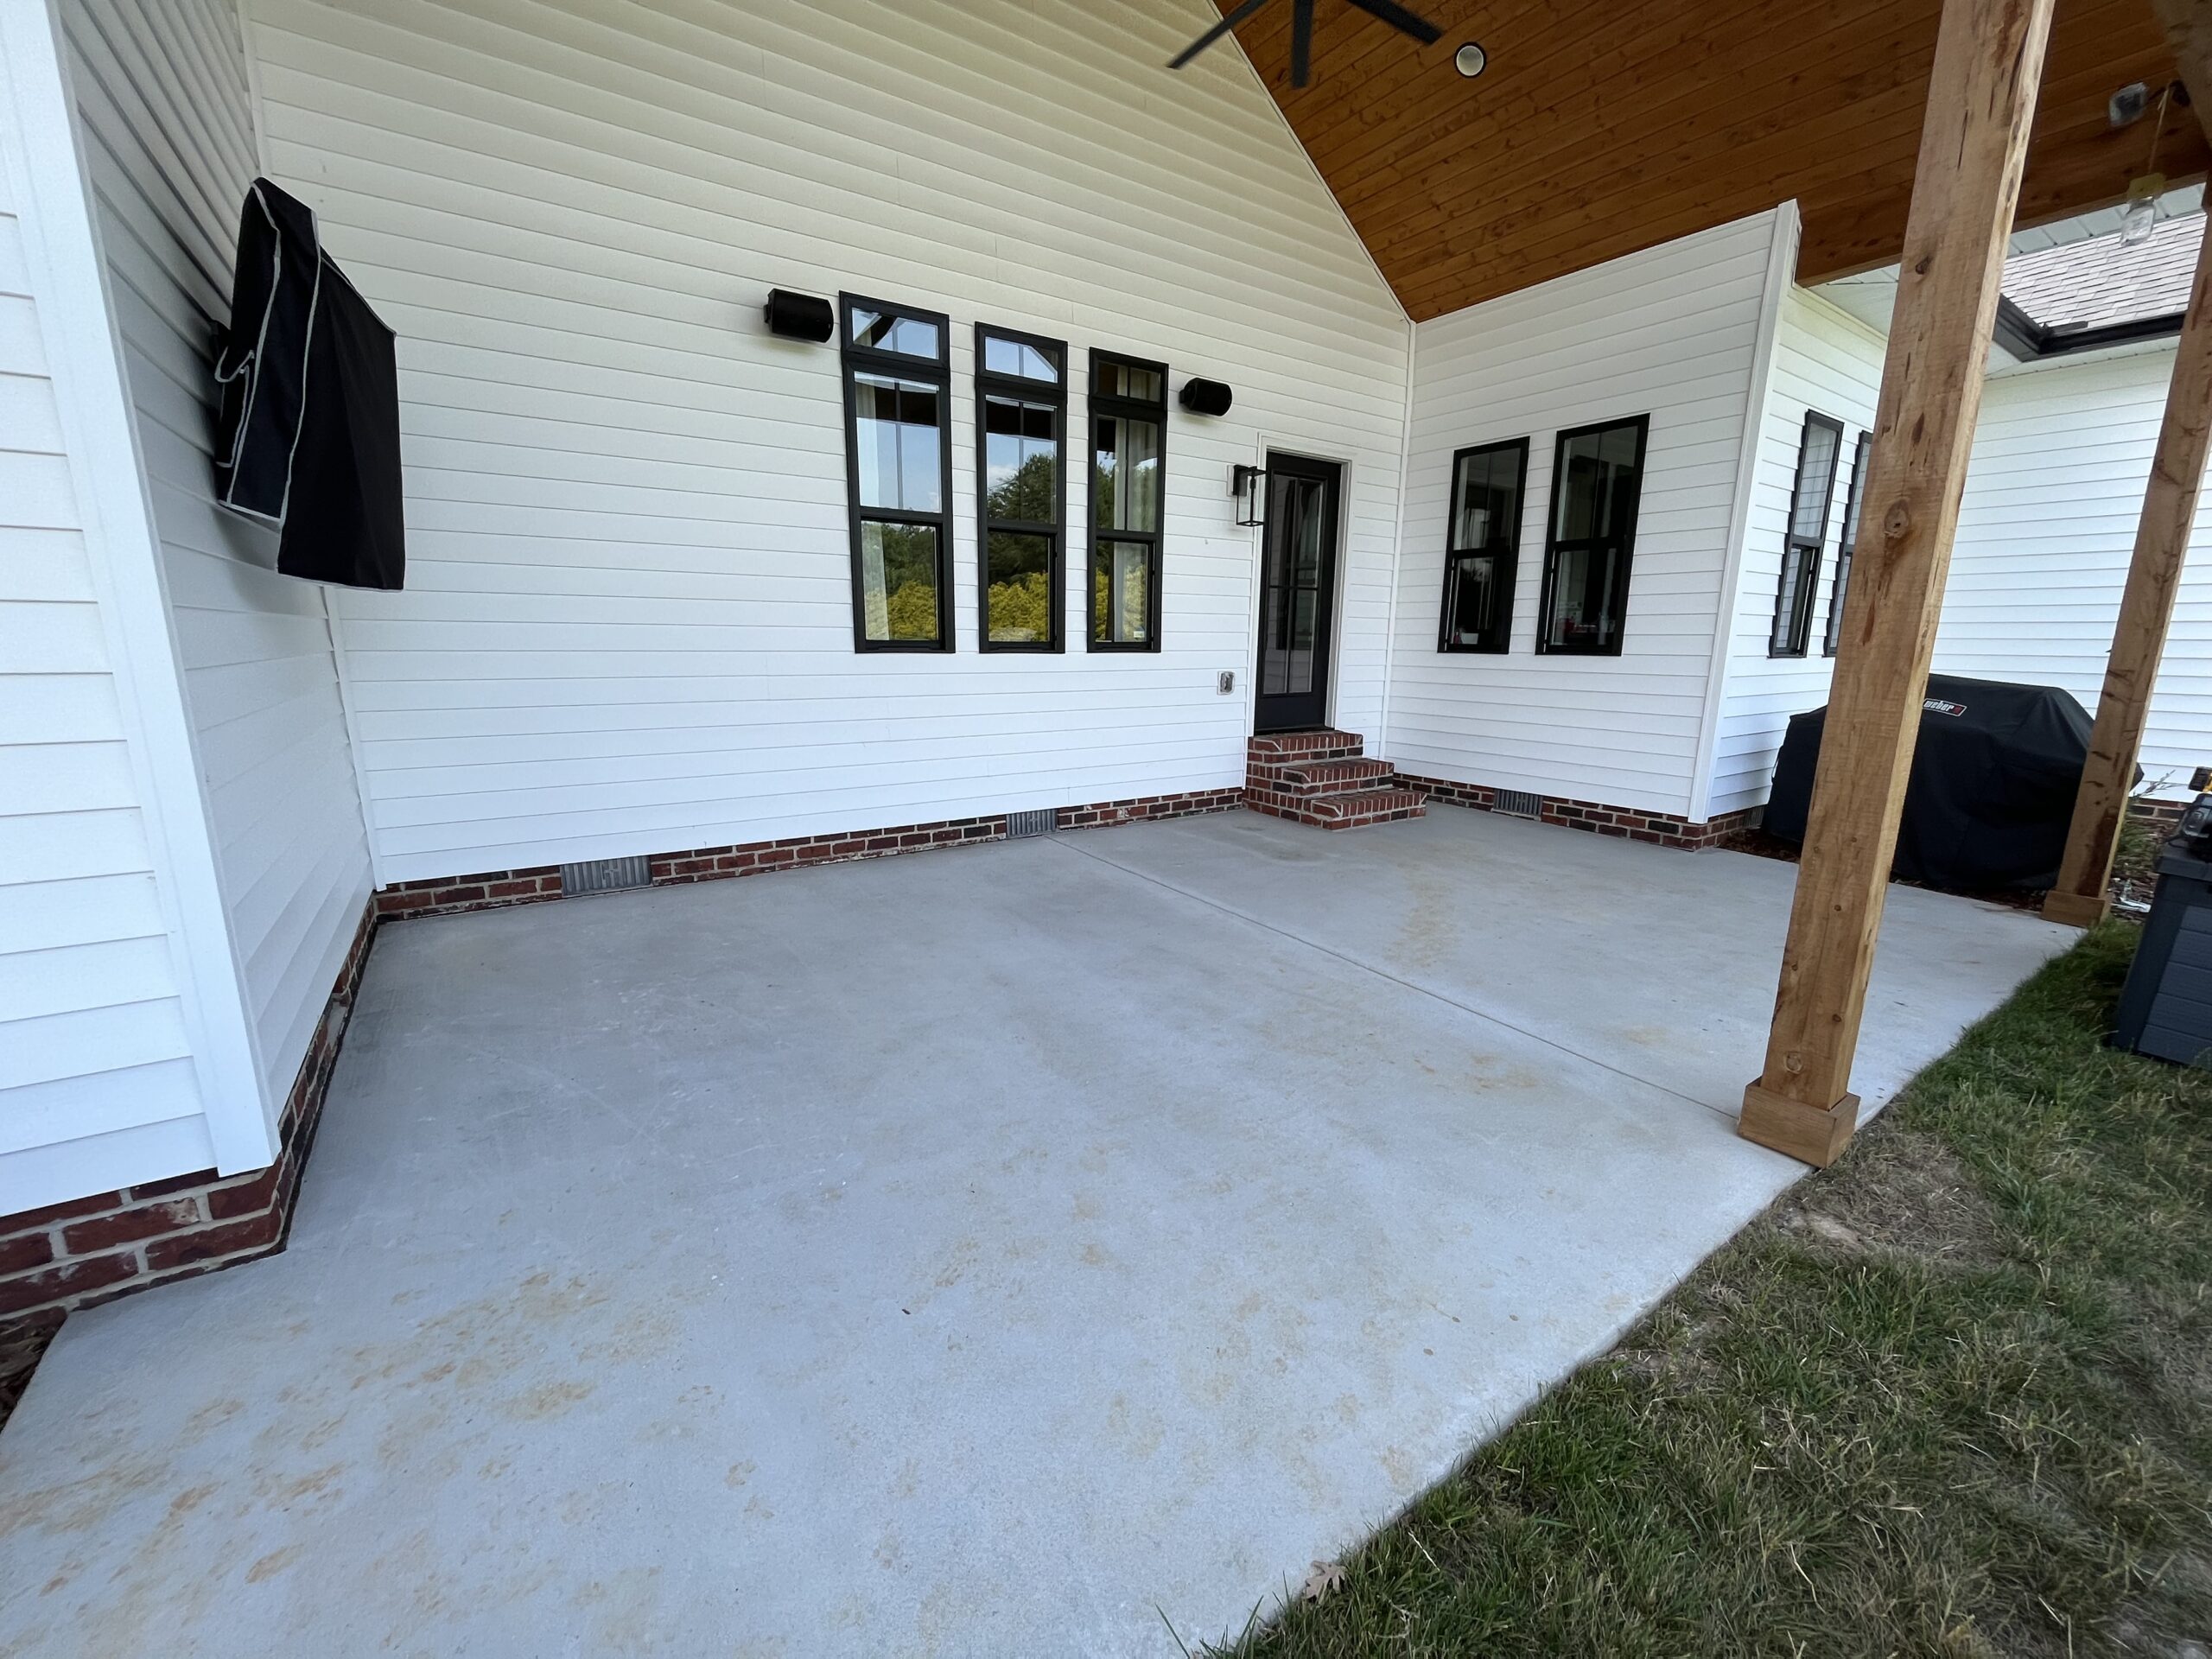 Original state of a concrete covered patio before the application of Silver Gray Antiquing stain